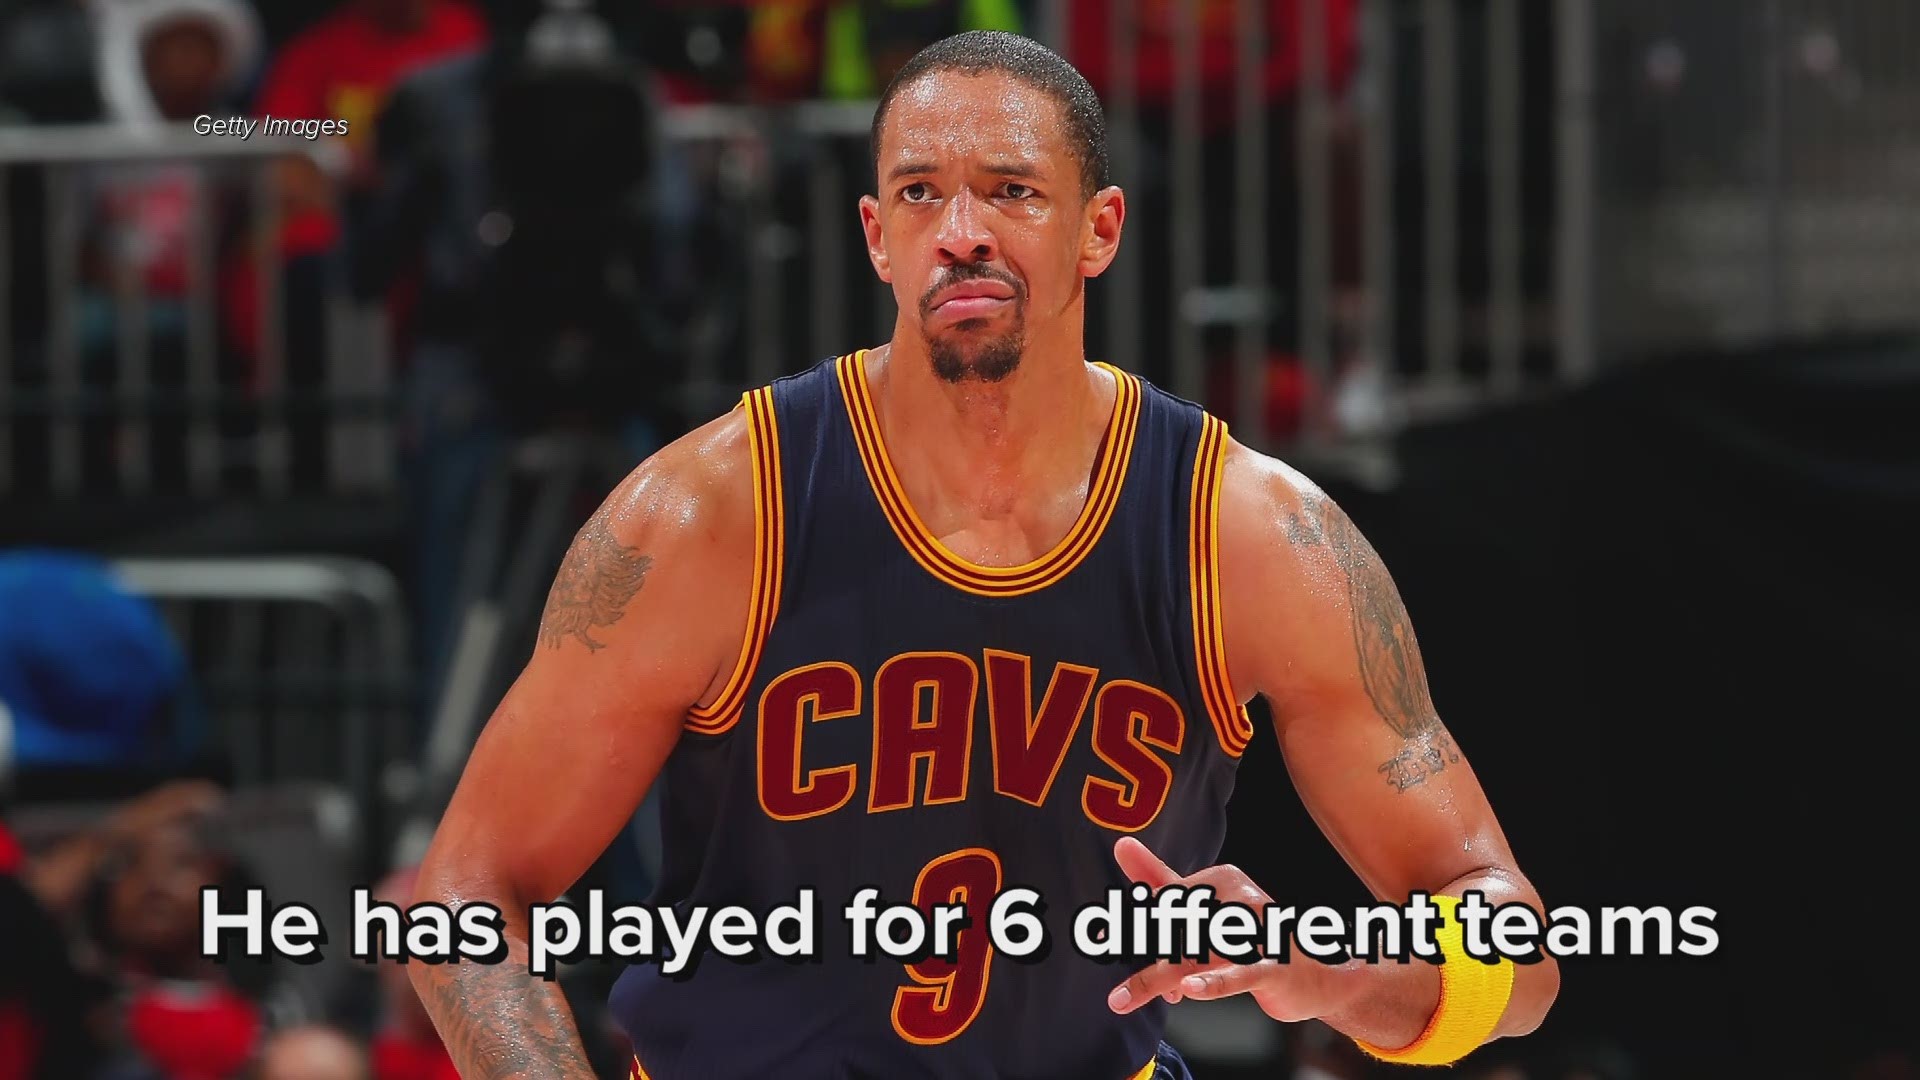 Cleveland Cavaliers officially announce signing of Channing Frye